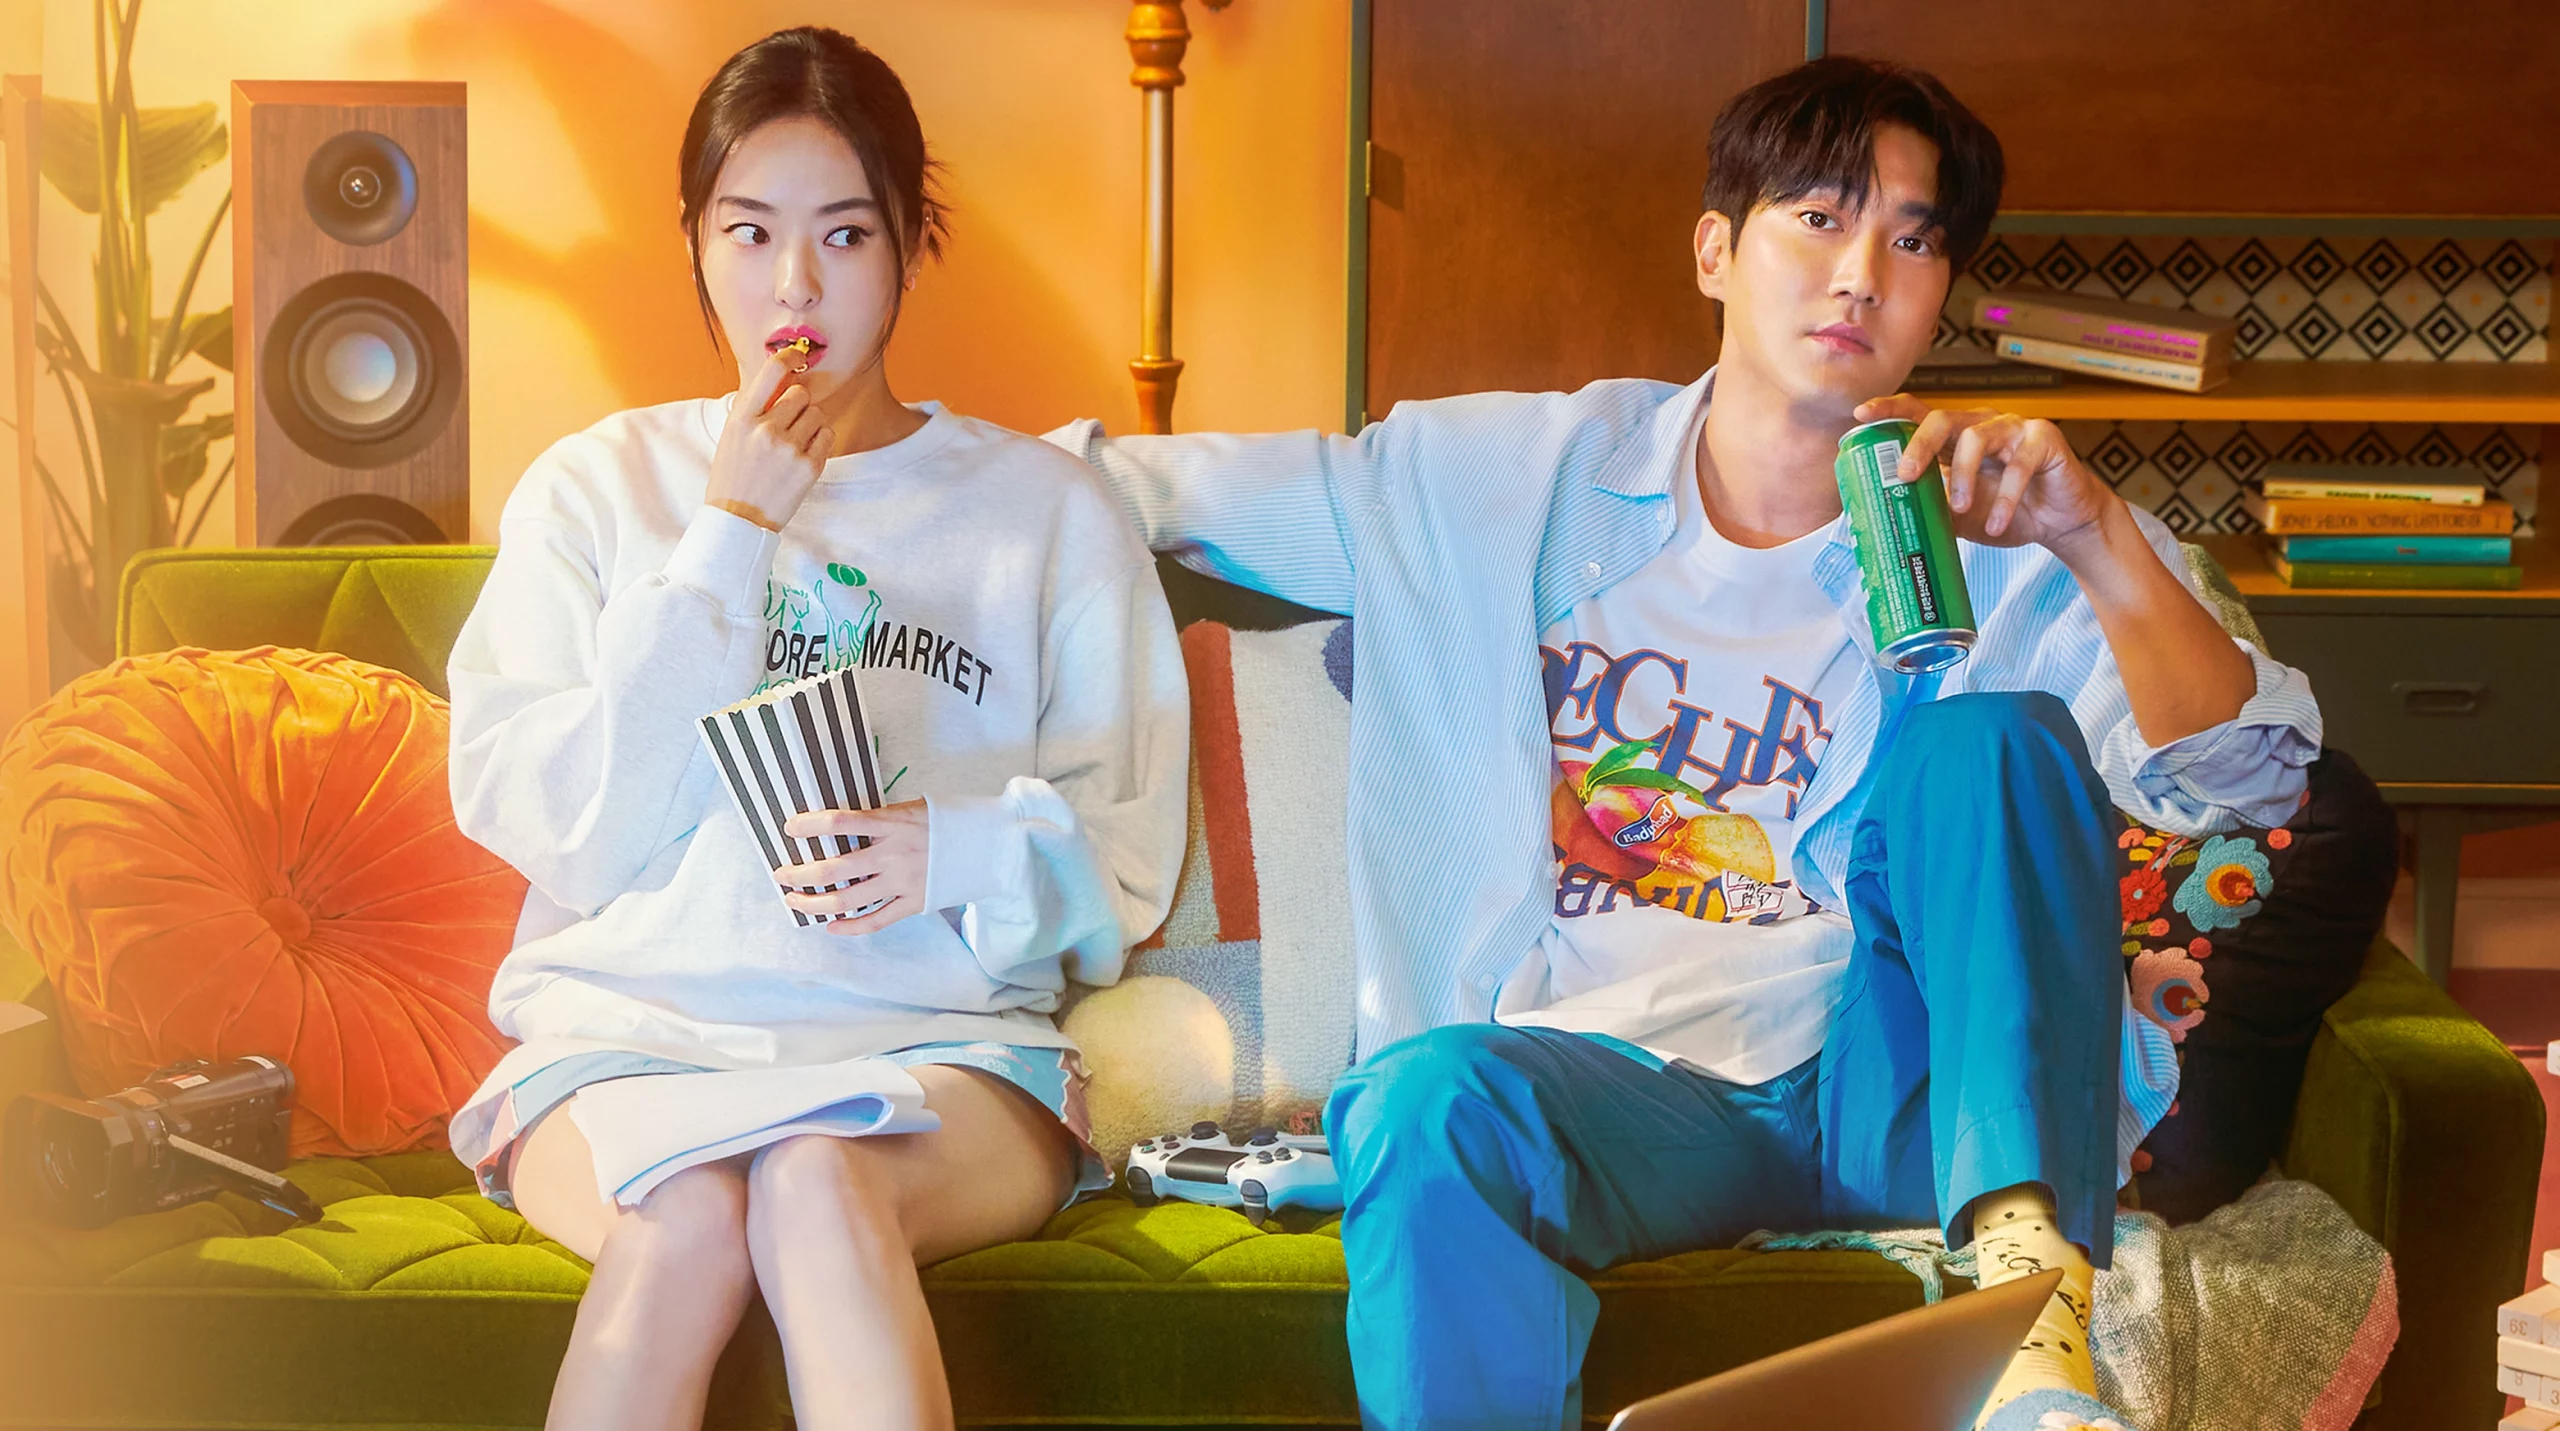 love is for suckers episode 11&12: Release Date
Credit to: ENA, Viki